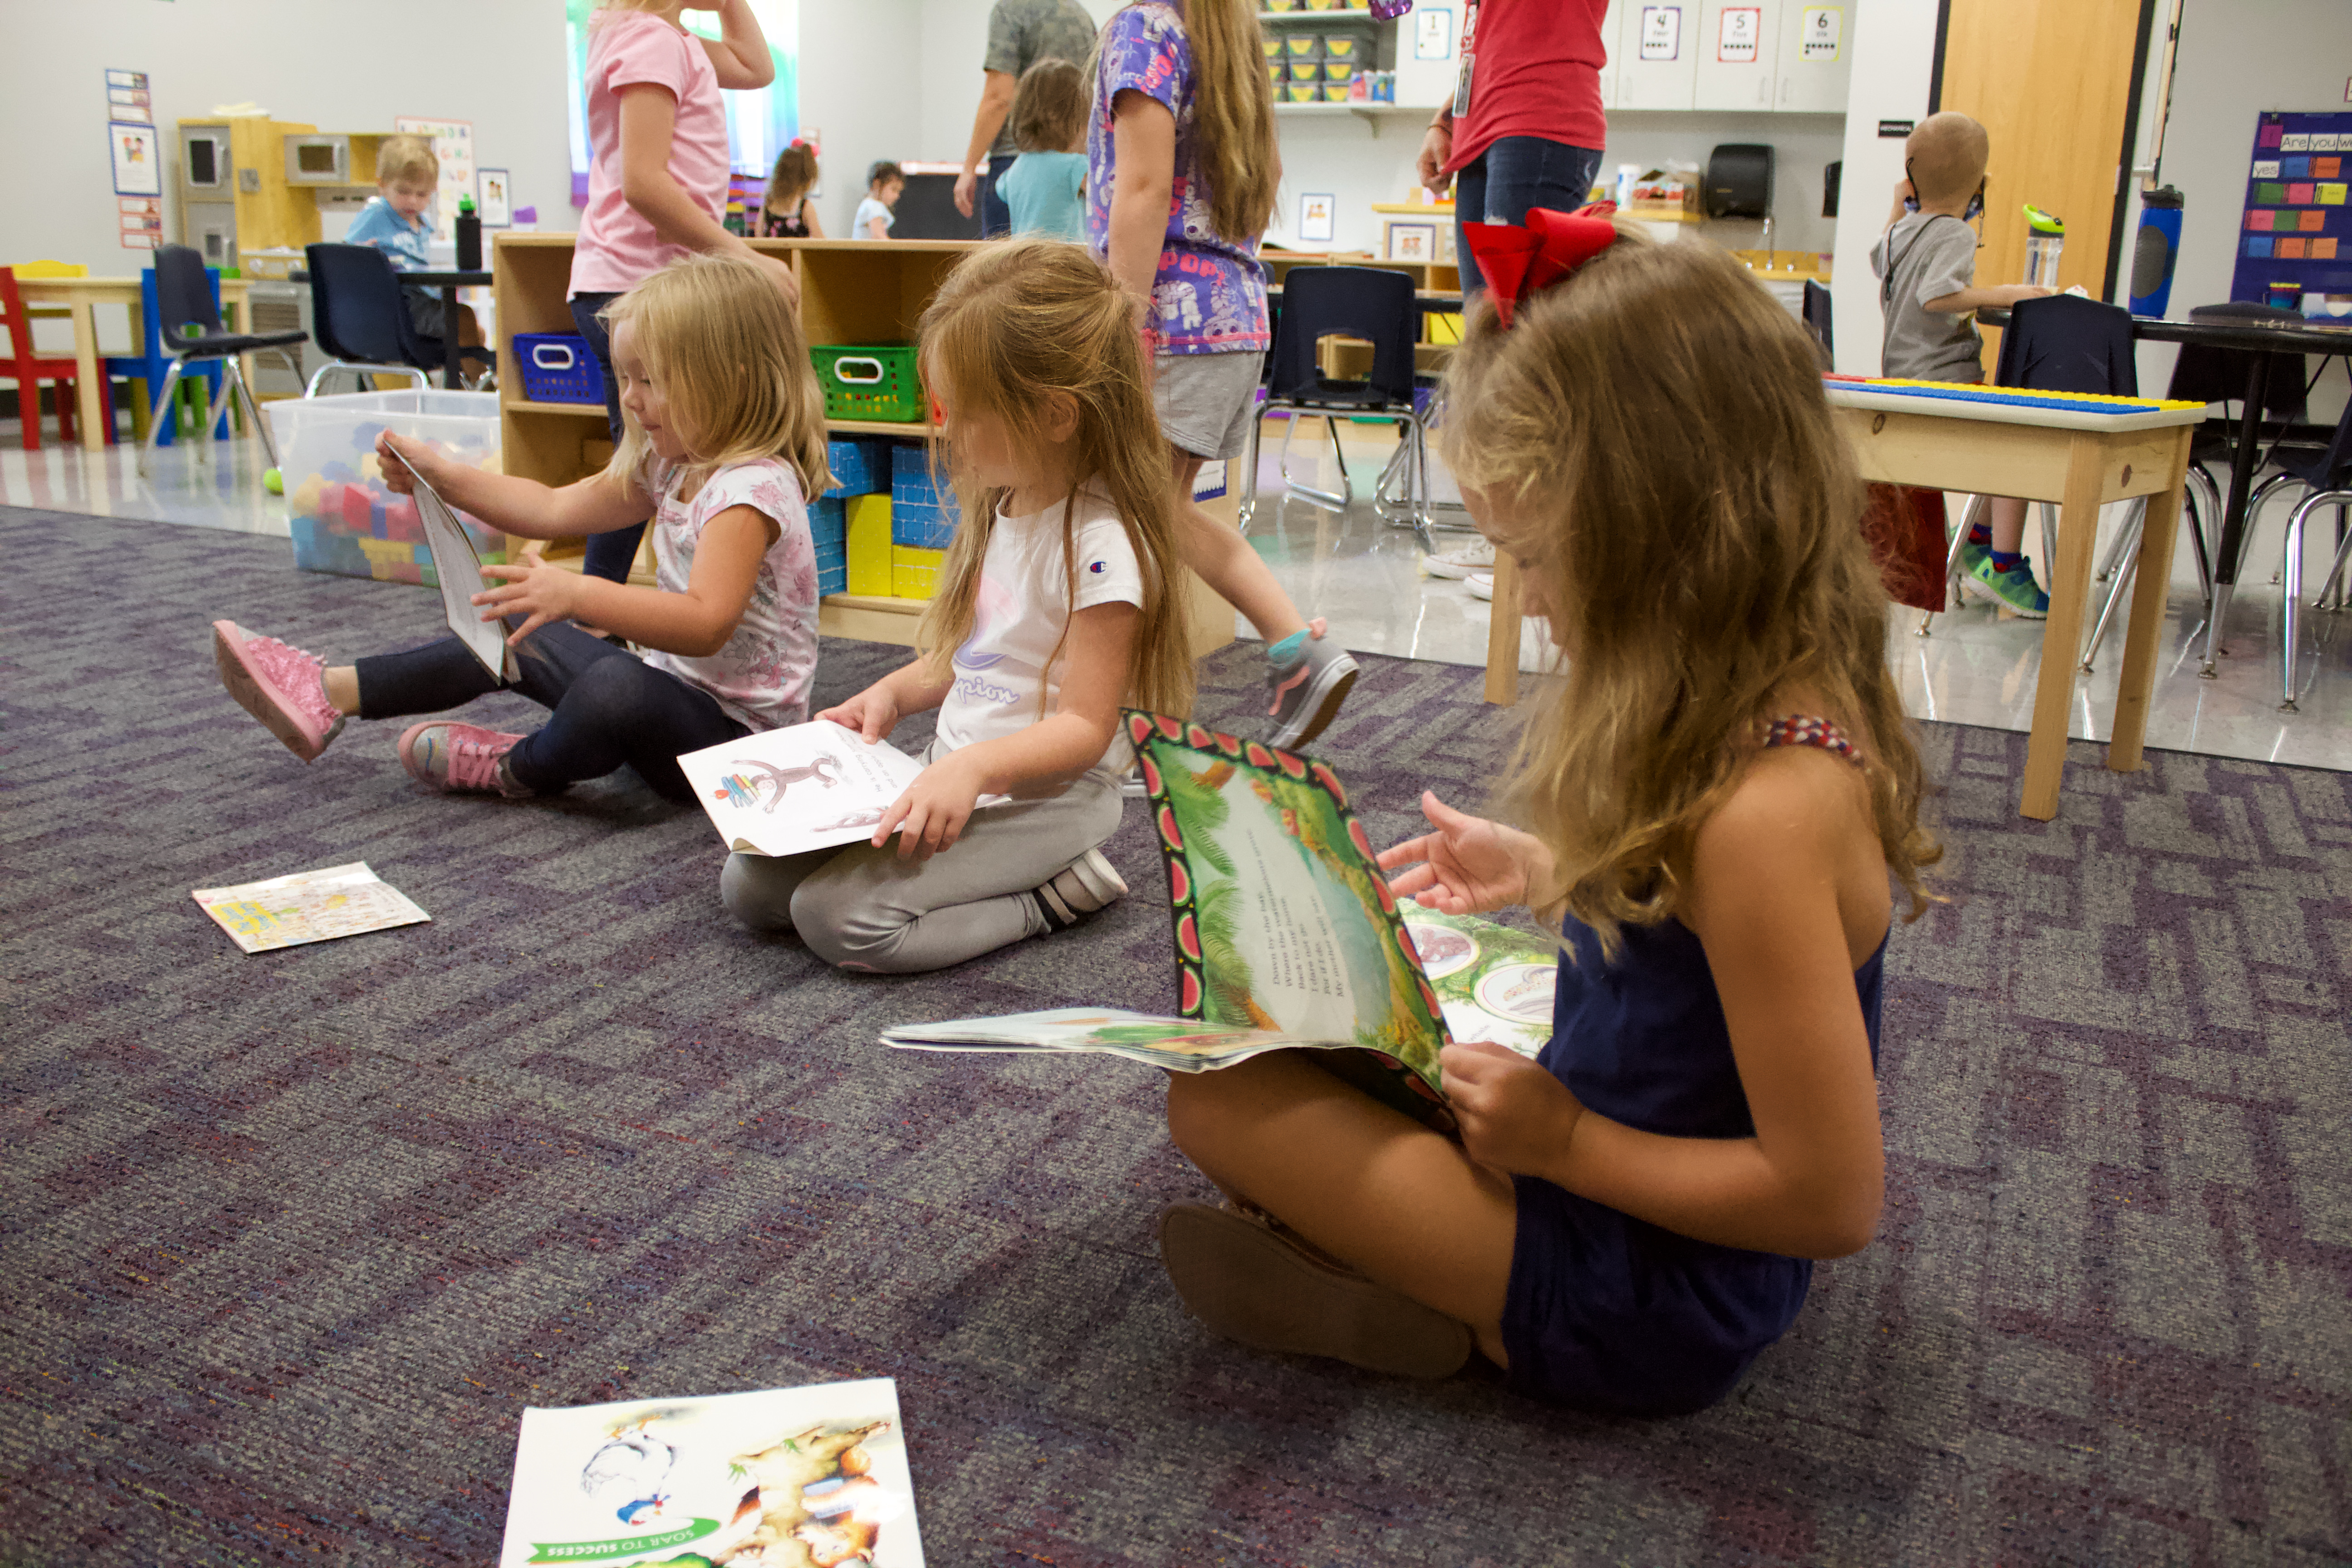 Preschool students sitting on the floor looking at picture books